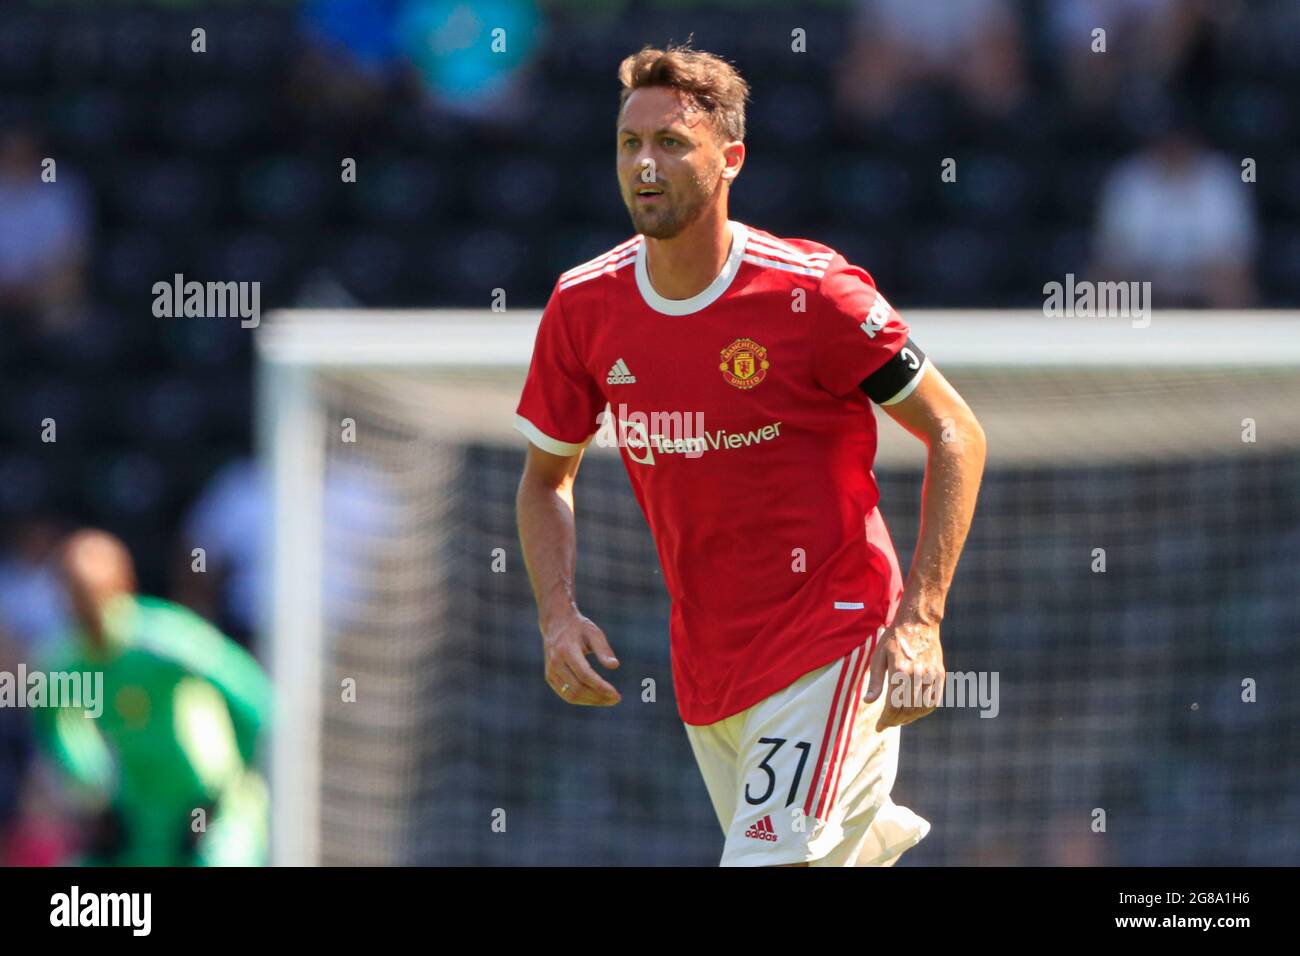 Derby, UK. 18th July, 2021. Nemanja Matic #31 of Manchester United in Derby, United Kingdom on 7/18/2021. (Photo by Conor Molloy/News Images/Sipa USA) Credit: Sipa USA/Alamy Live News Stock Photo